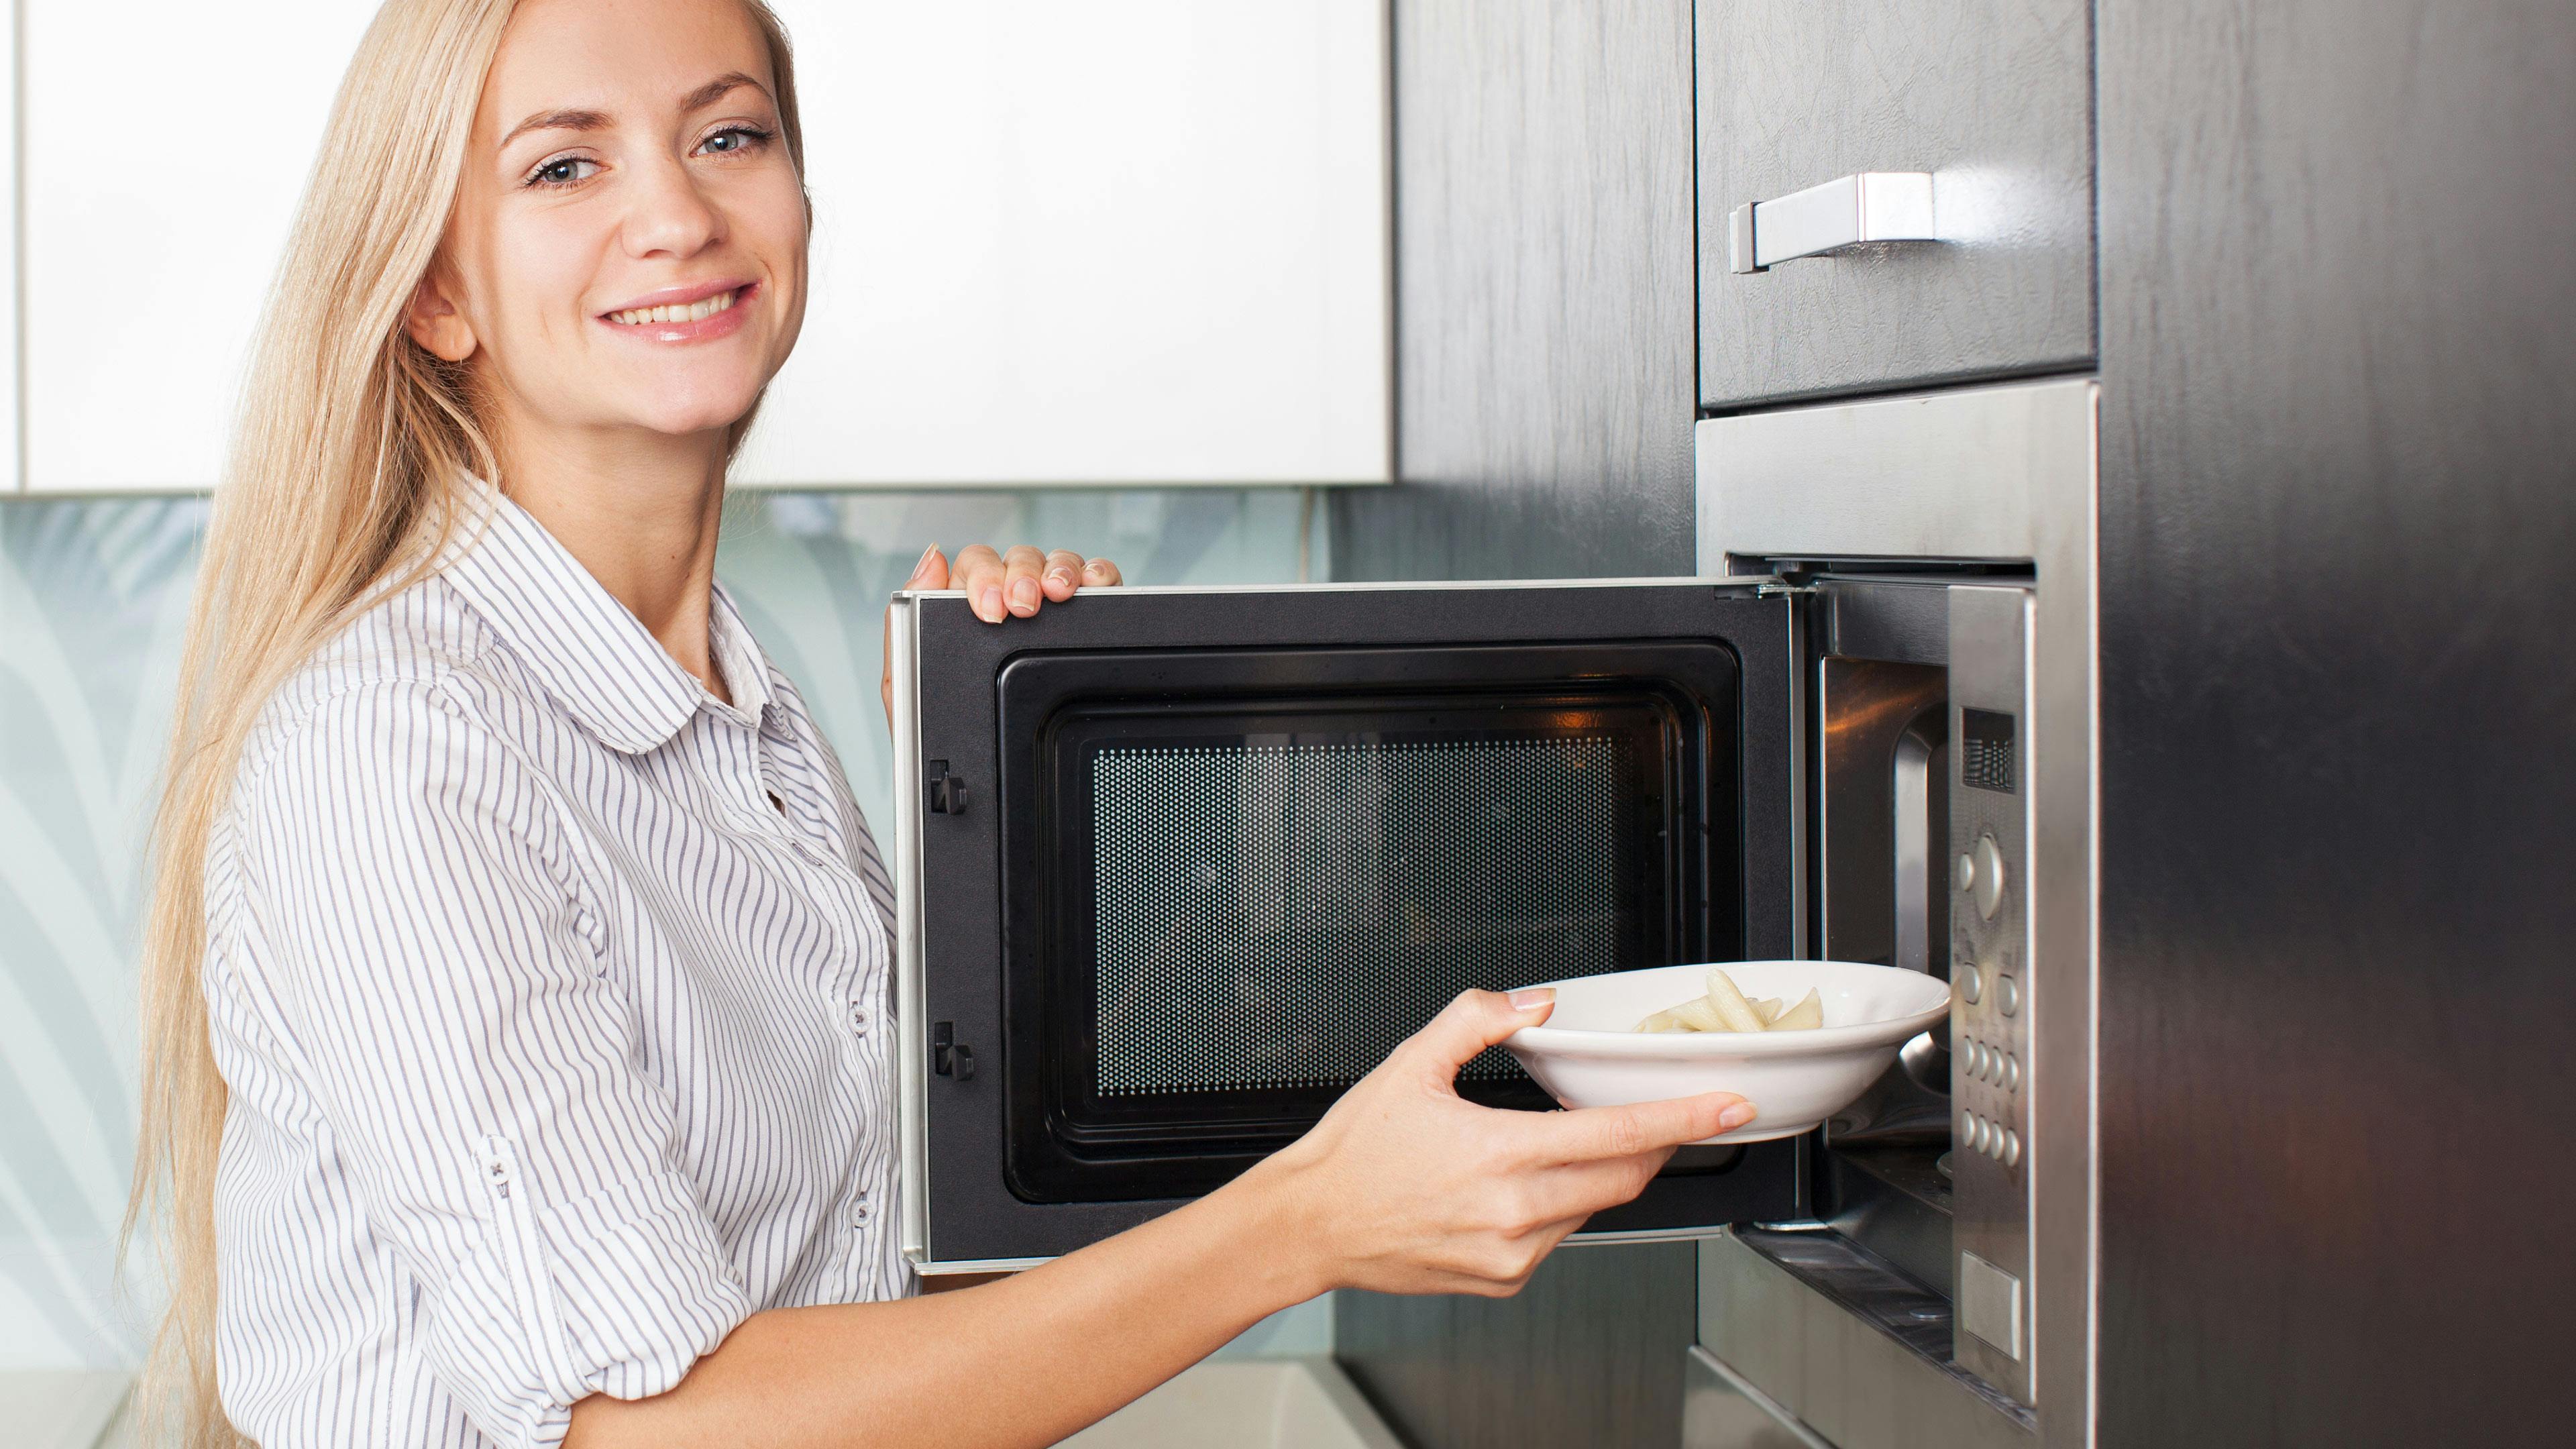 Microwave Oven Buying Guide